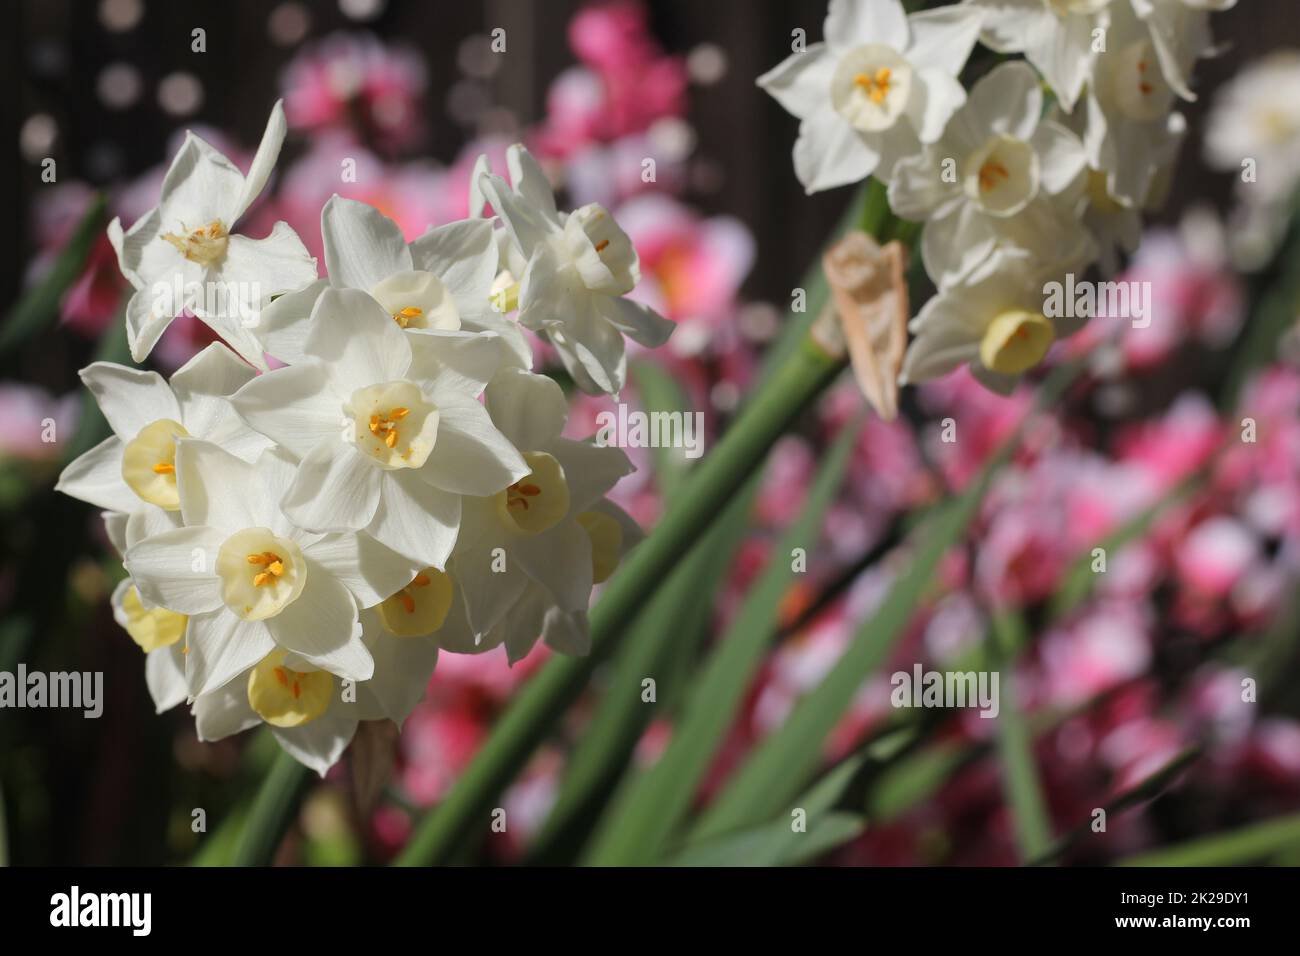 Spring Daffodils With Pink Flowers in Background Stock Photo